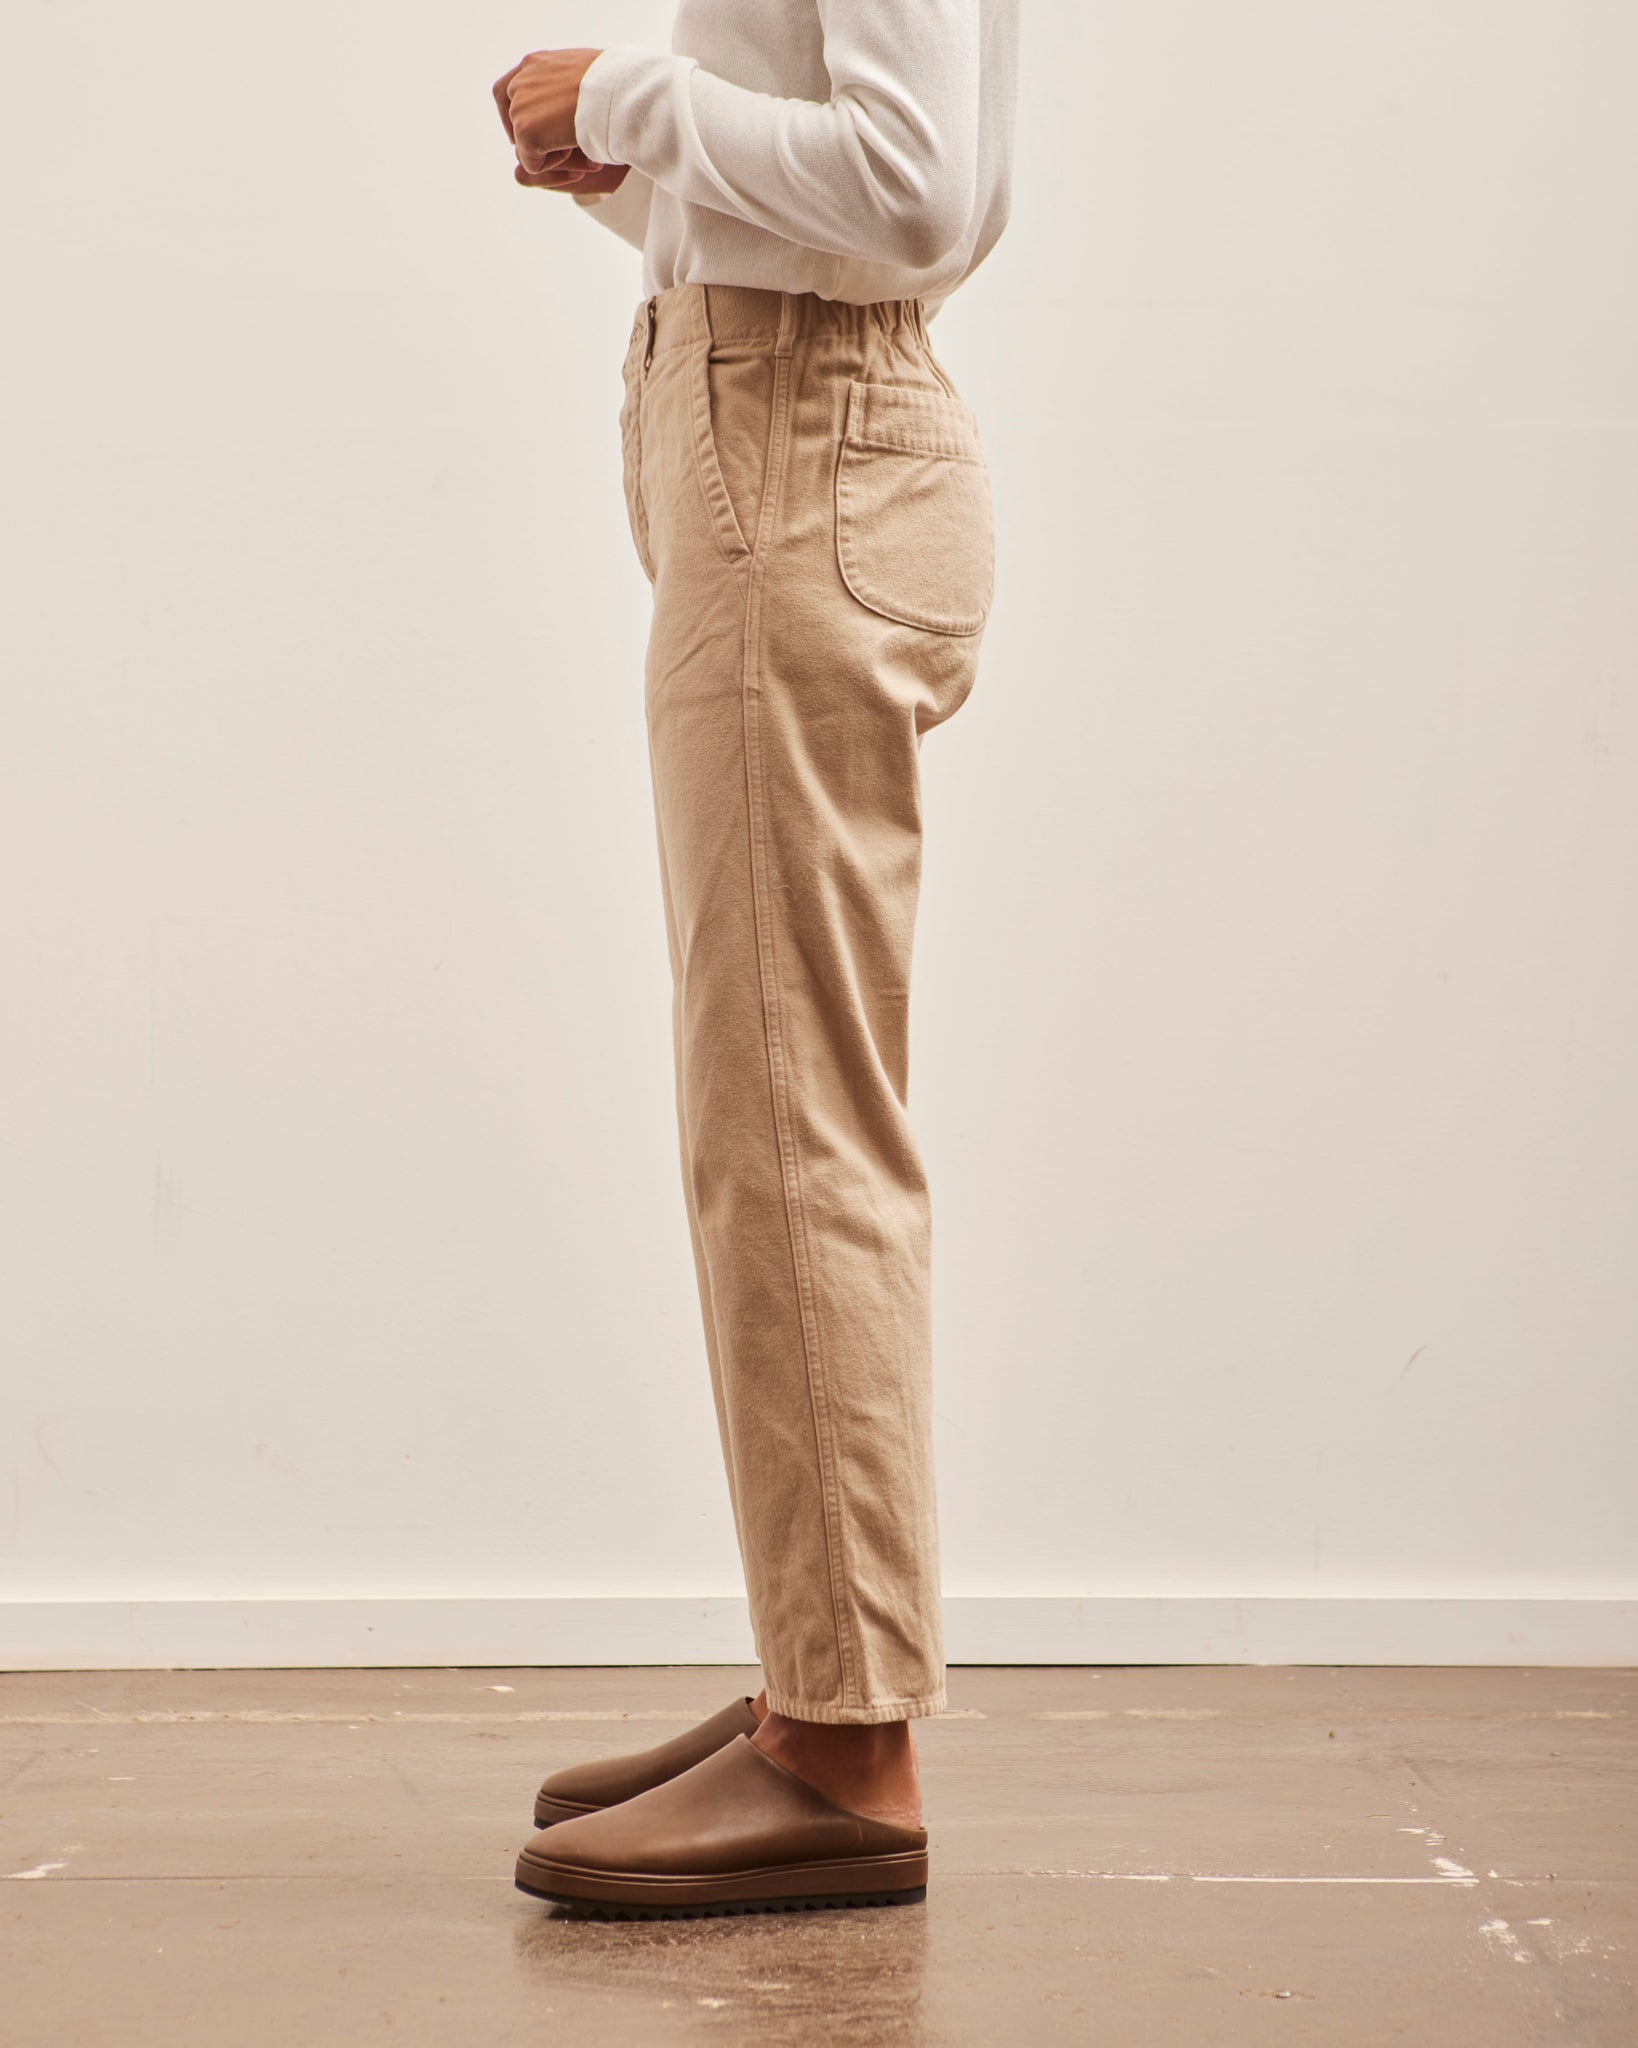 orSlow French Work Pant, Beige